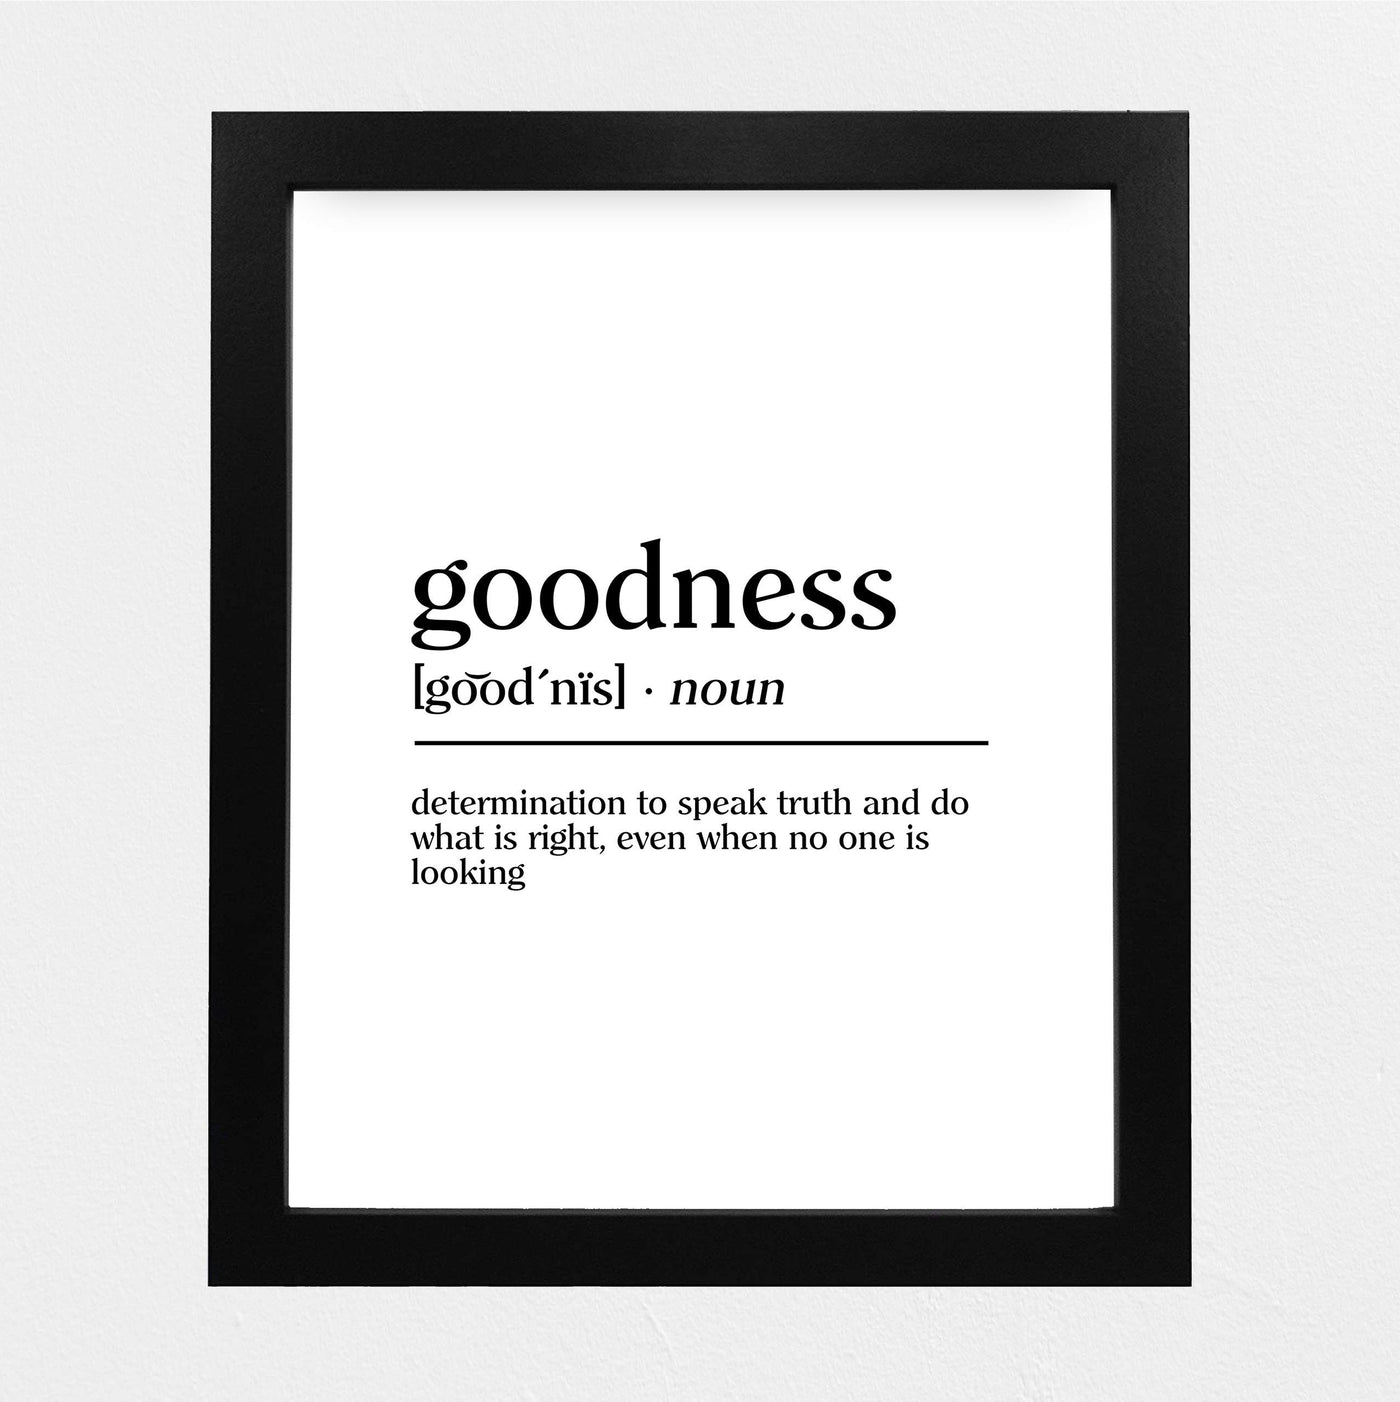 Definition of Goodness Inspirational Christian Wall Art-8 x 10" Typographic"Gifts of the Spirit" Print-Ready to Frame. Motivational Home-Office-Church-Sunday School Decor. Great Religious Gift!